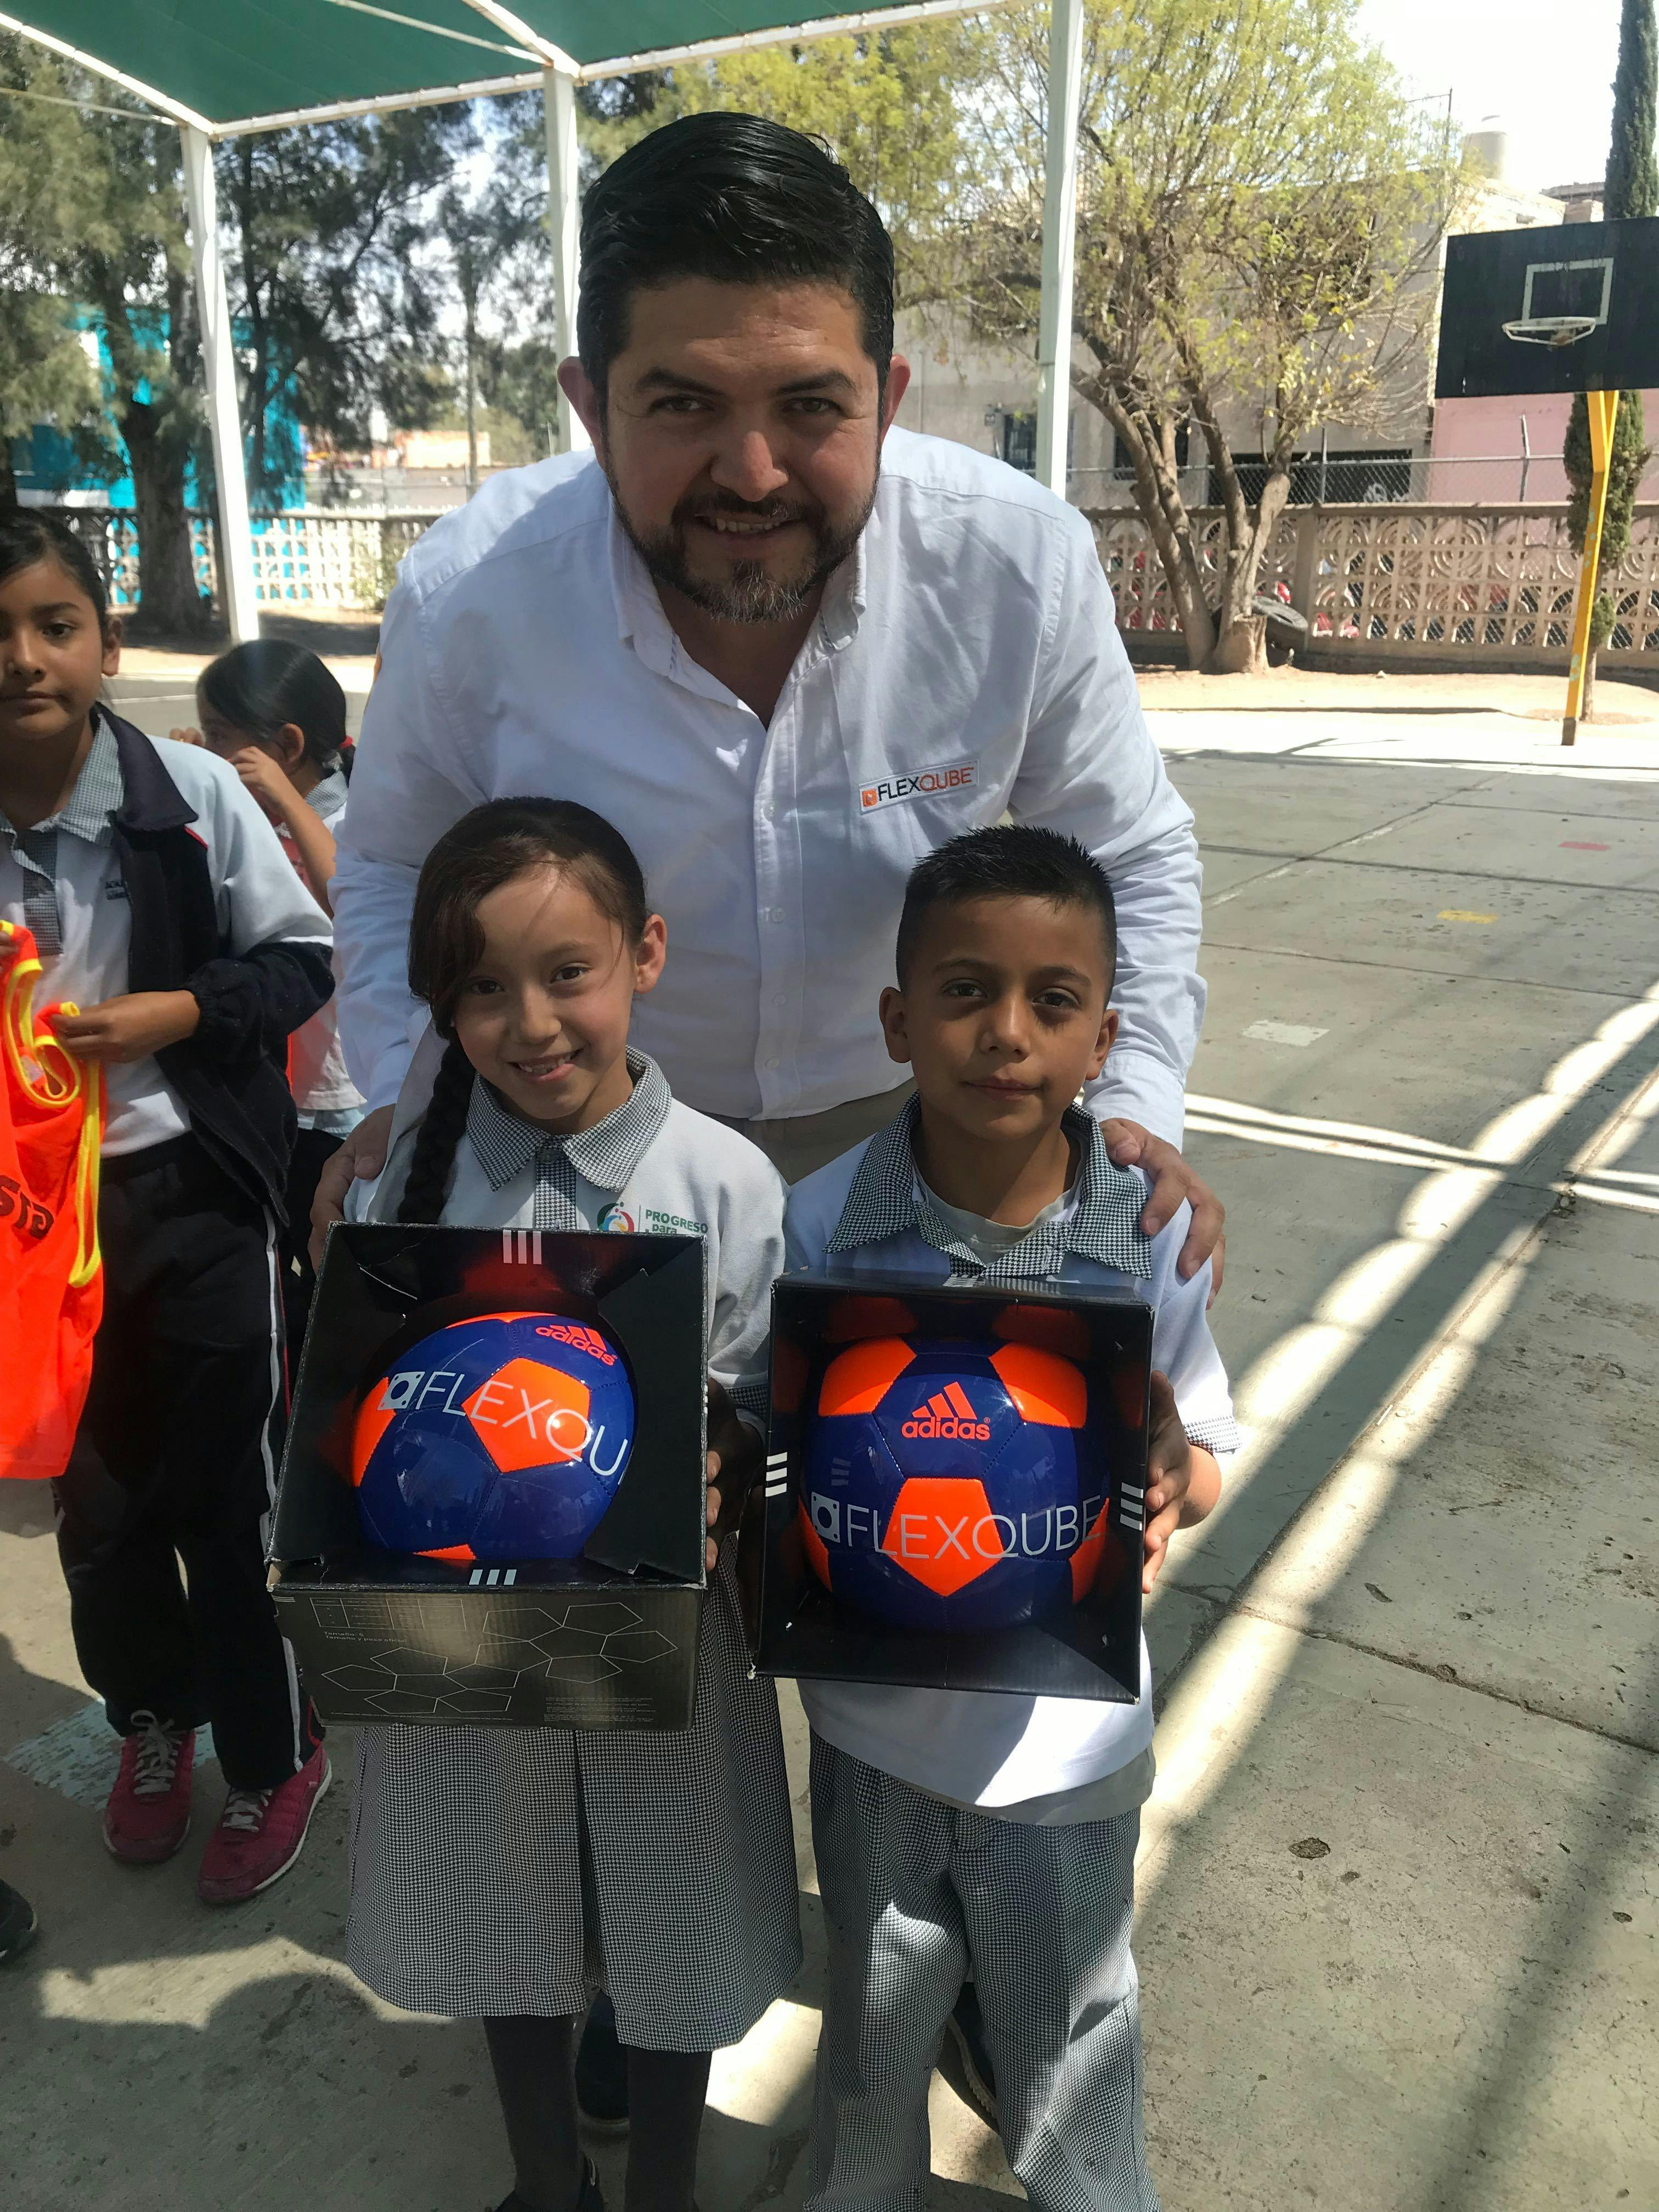 FlexQube Mexico Sales Manager Hector Flores giving our footballs to children in Mexico